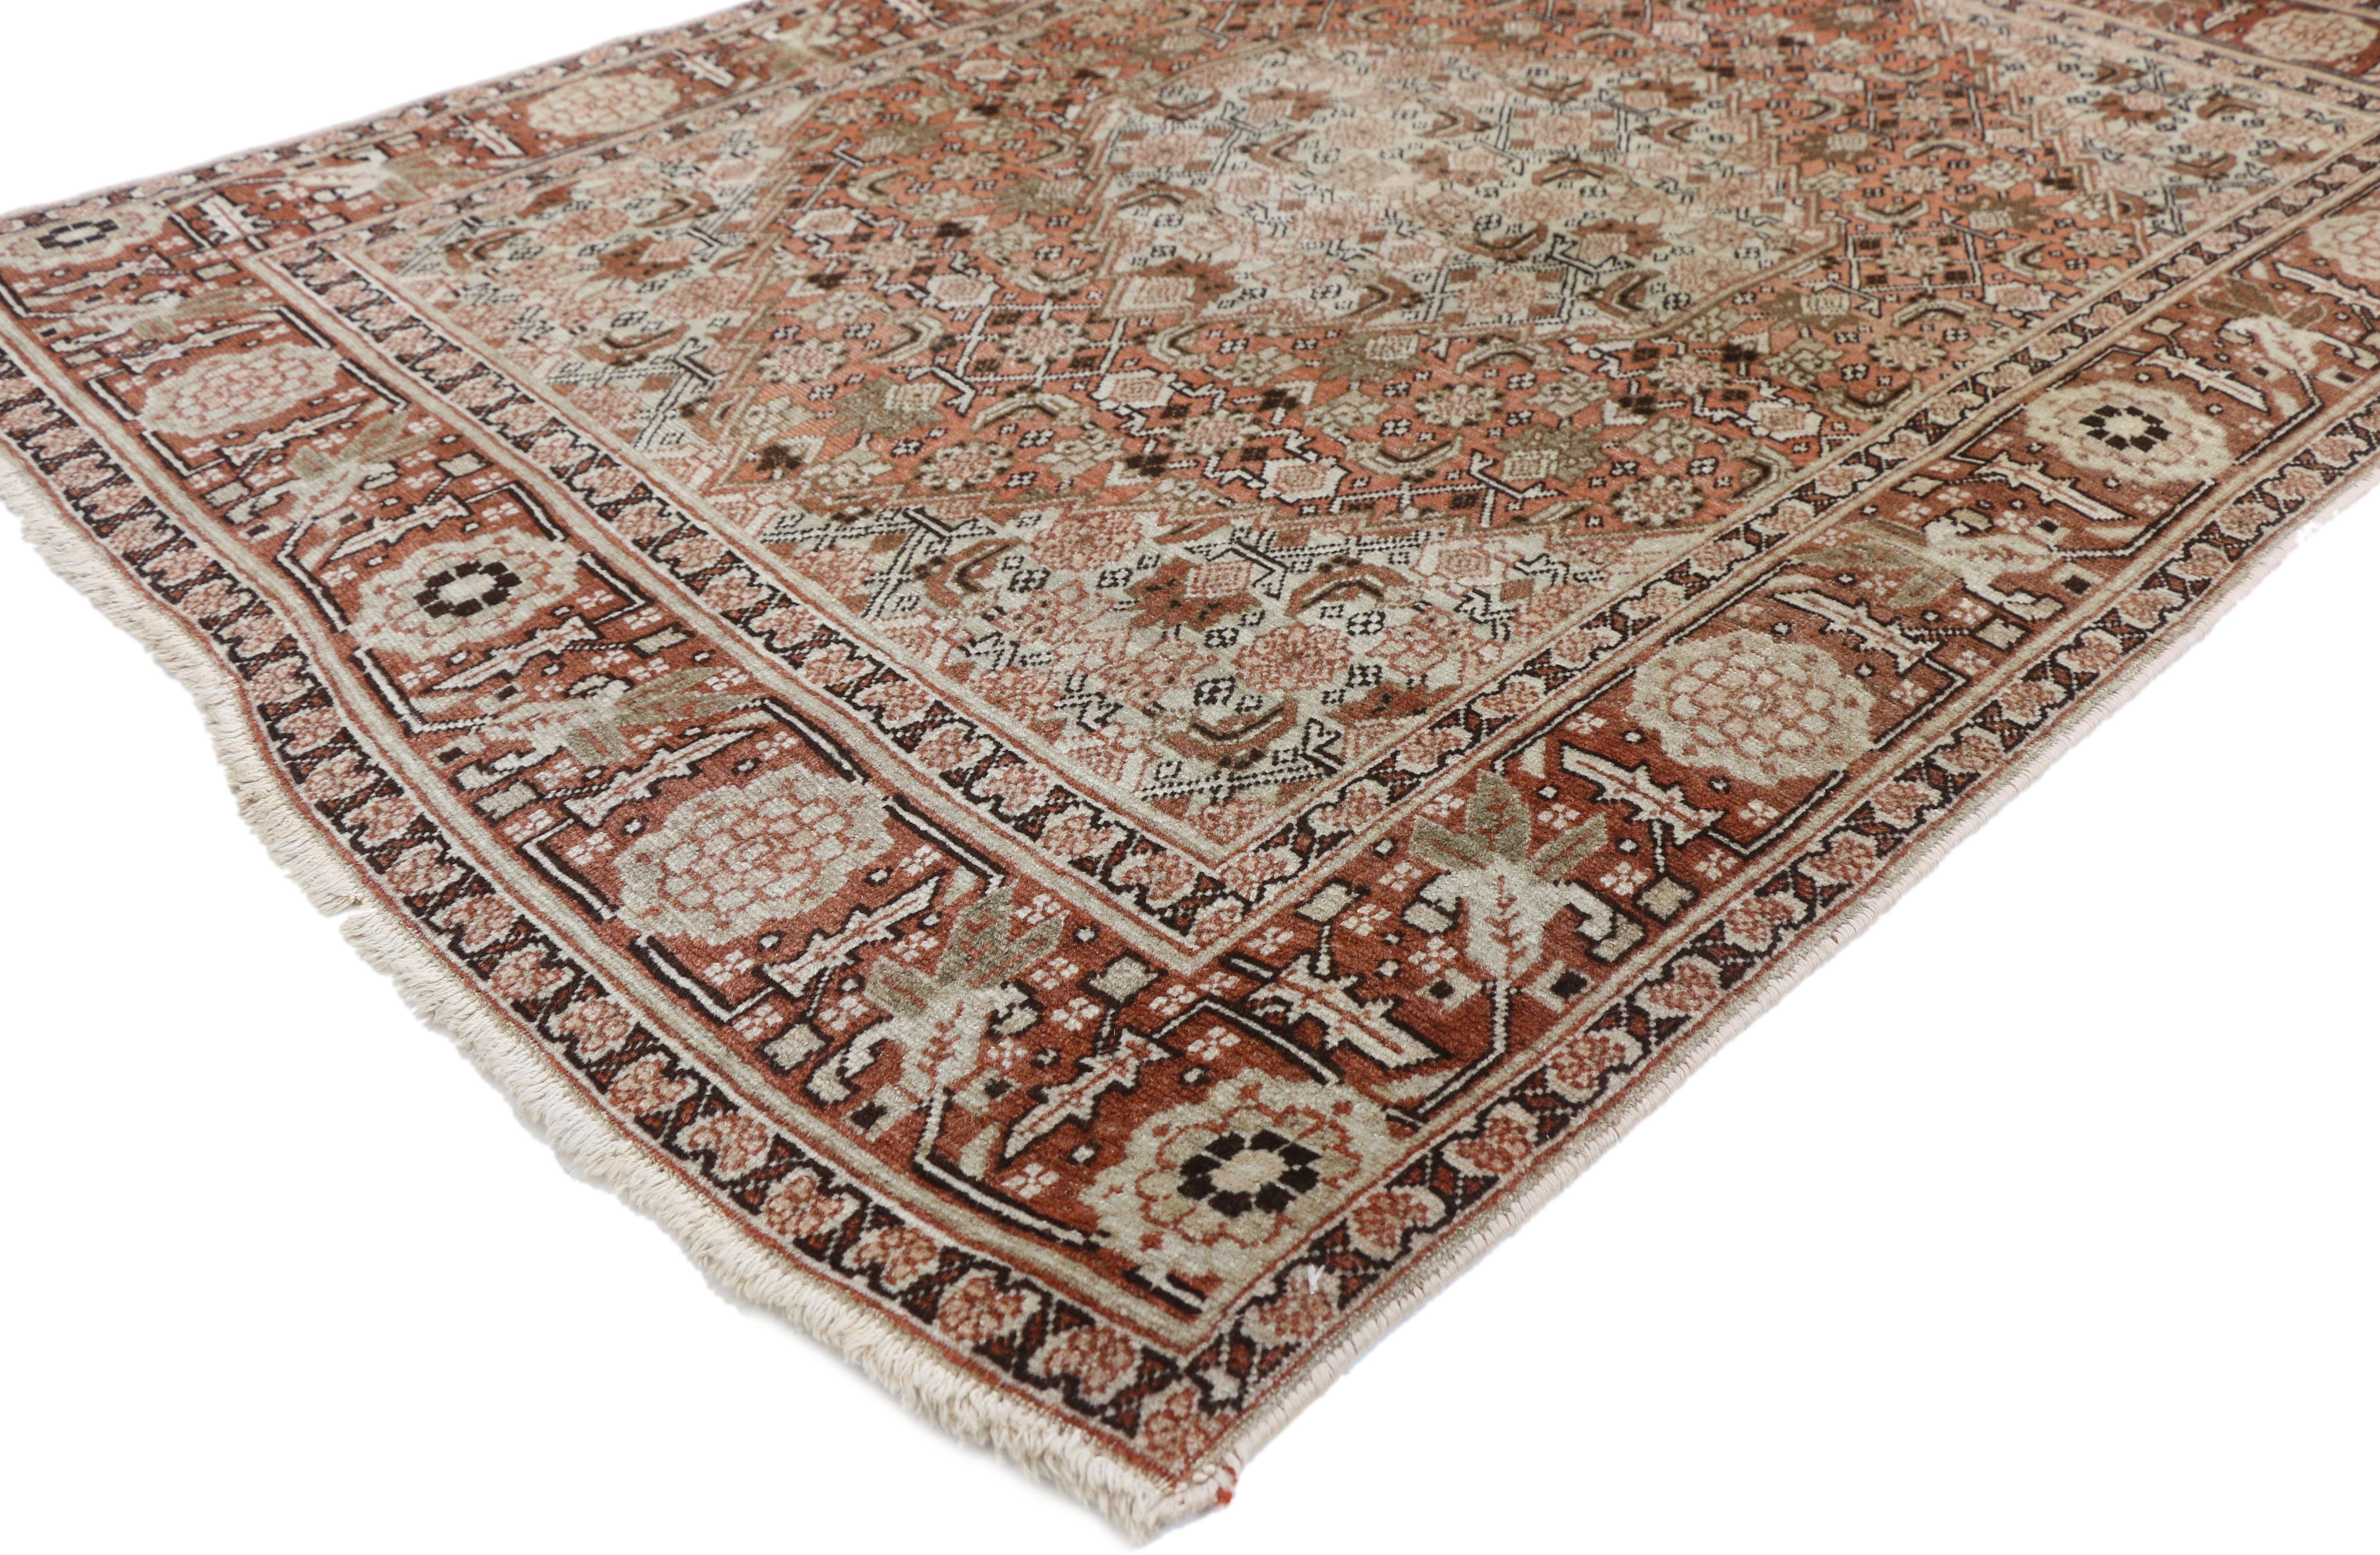 73403, antique Persian Tabriz accent rug, foyer or entry rug with Arts & Crafts style. This hand knotted wool antique Persian Tabriz rug features a serrated hexagonal medallion set against an abrashed field. The medallion, field, and corner